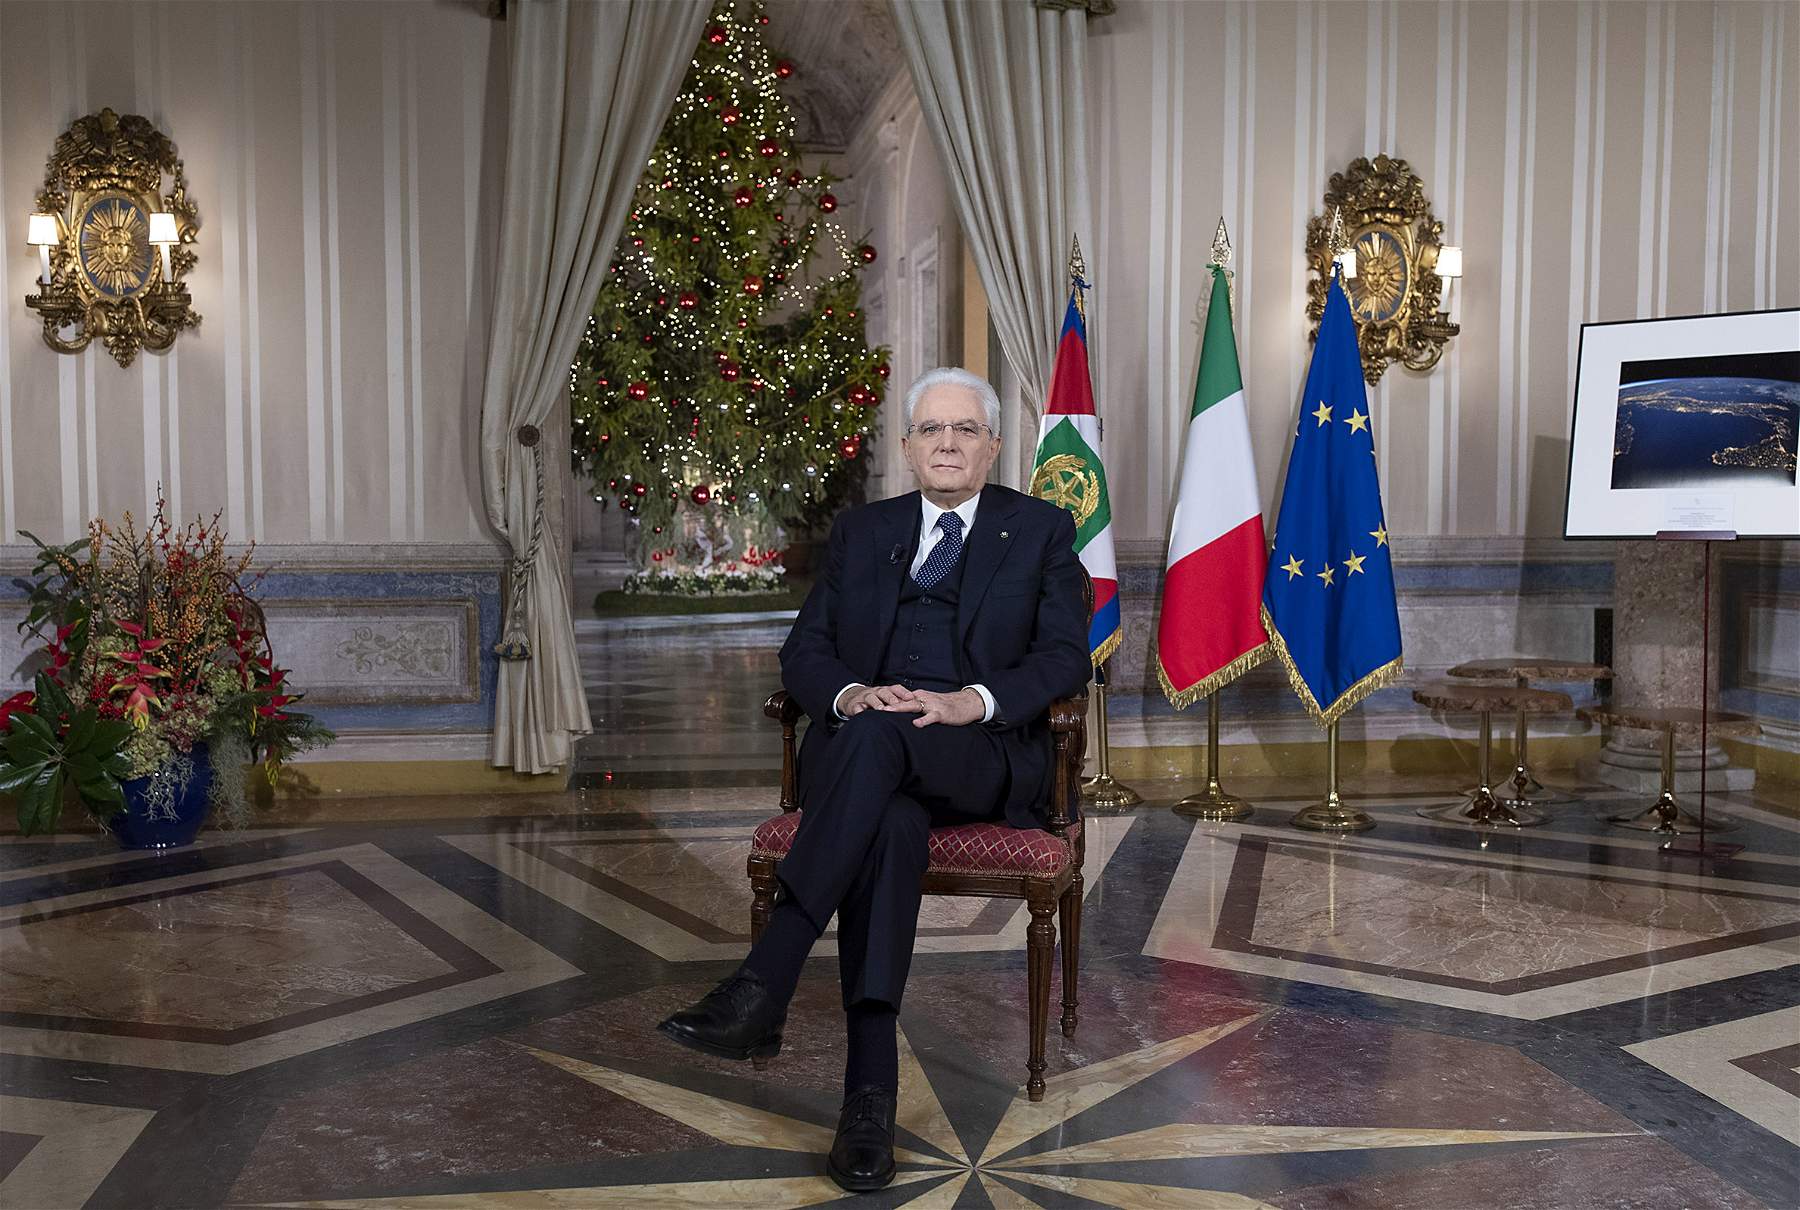 In year-end speech, President Sergio Mattarella stresses the role of culture and education